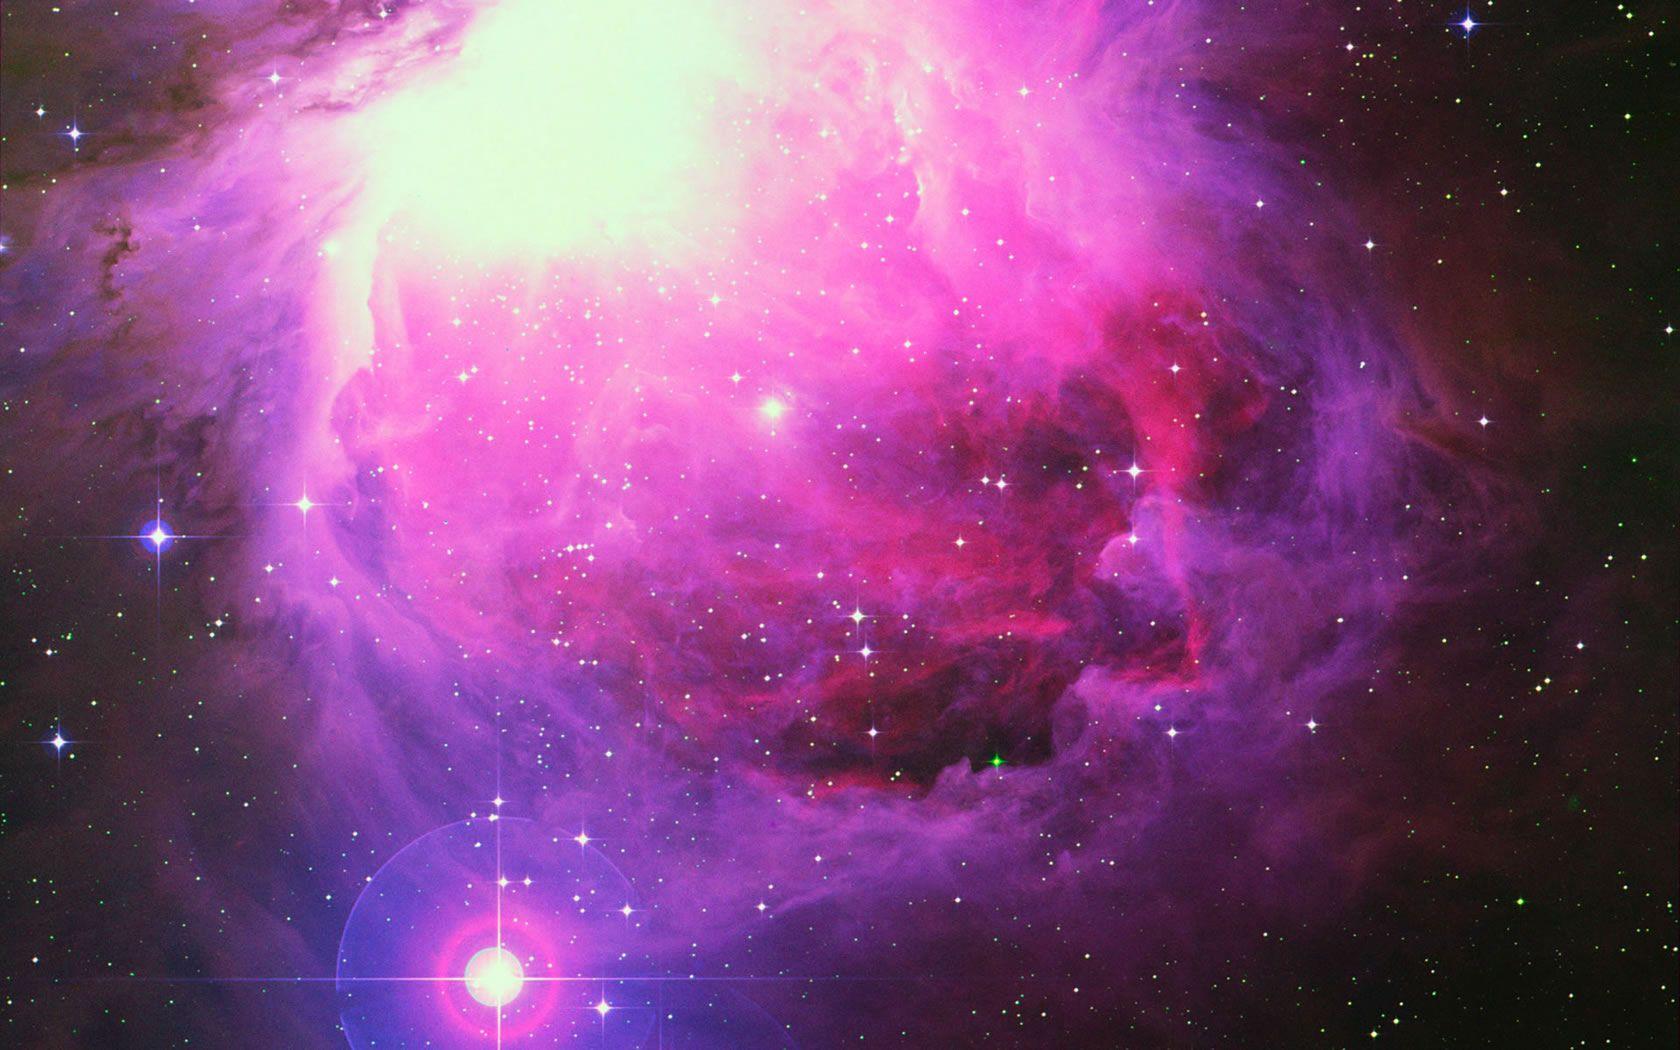 TRW41: Cool Cosmic Wallpaper in Best Resolutions, 100% Quality HD